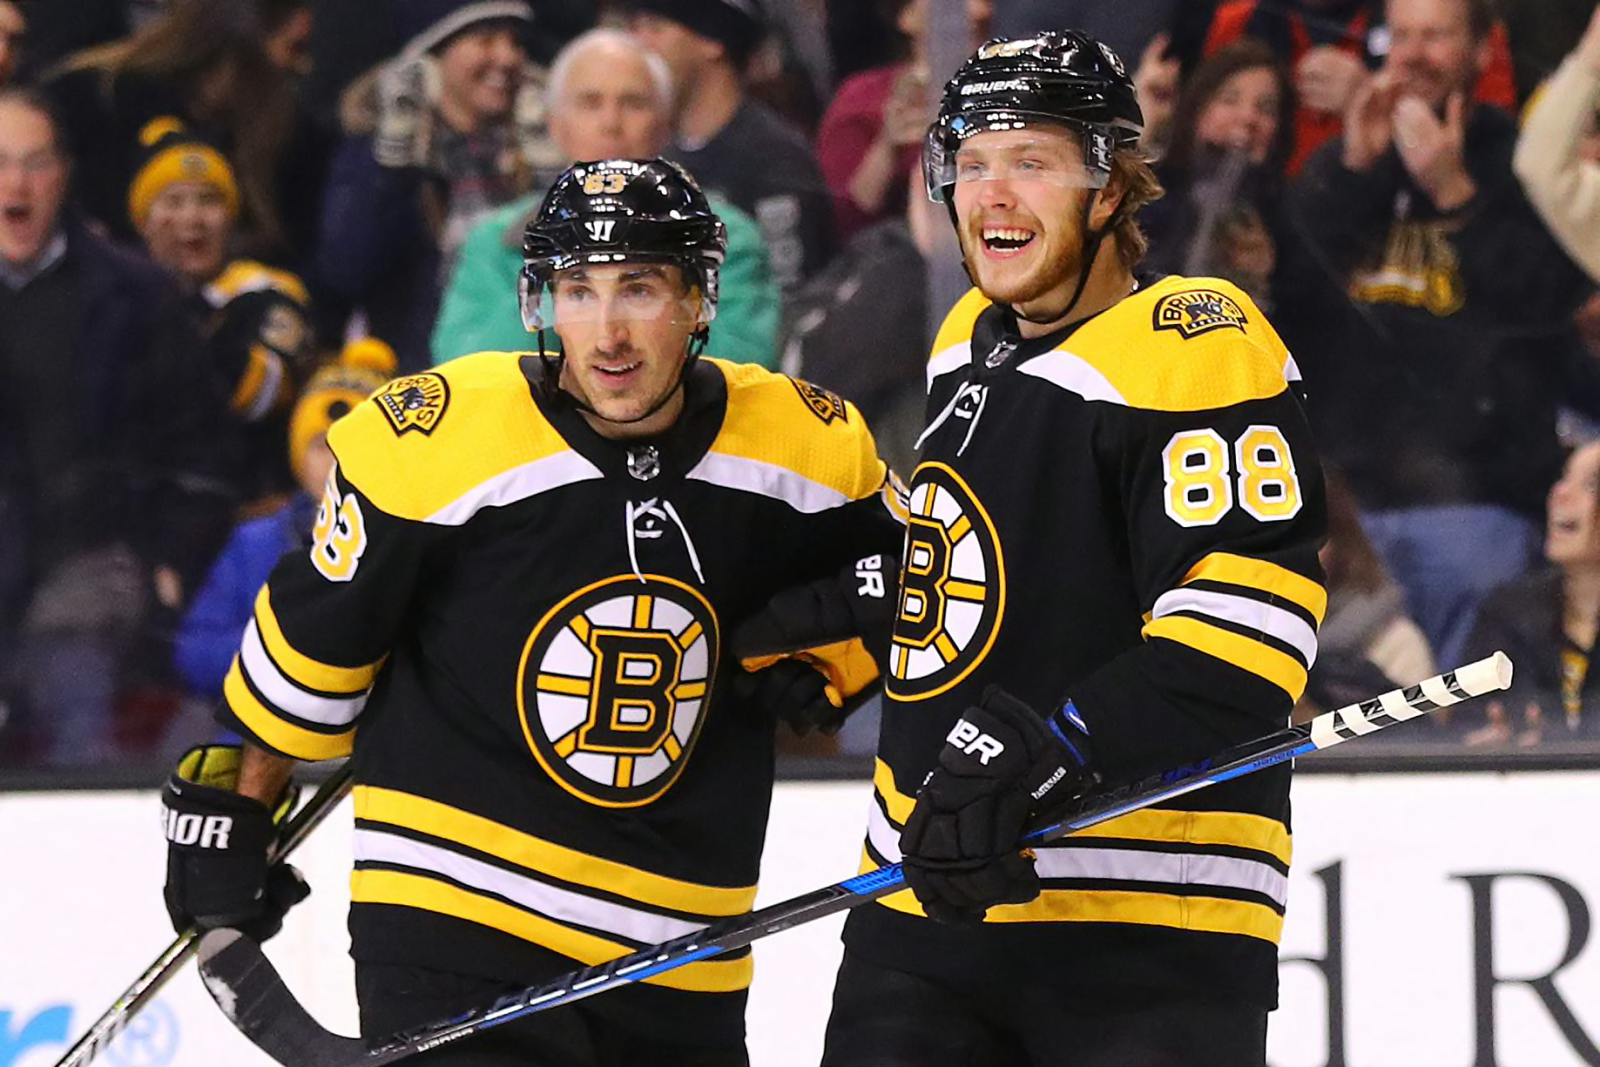 Bruins fans can vote Patrice Bergeron in to 2019 All-Star Game